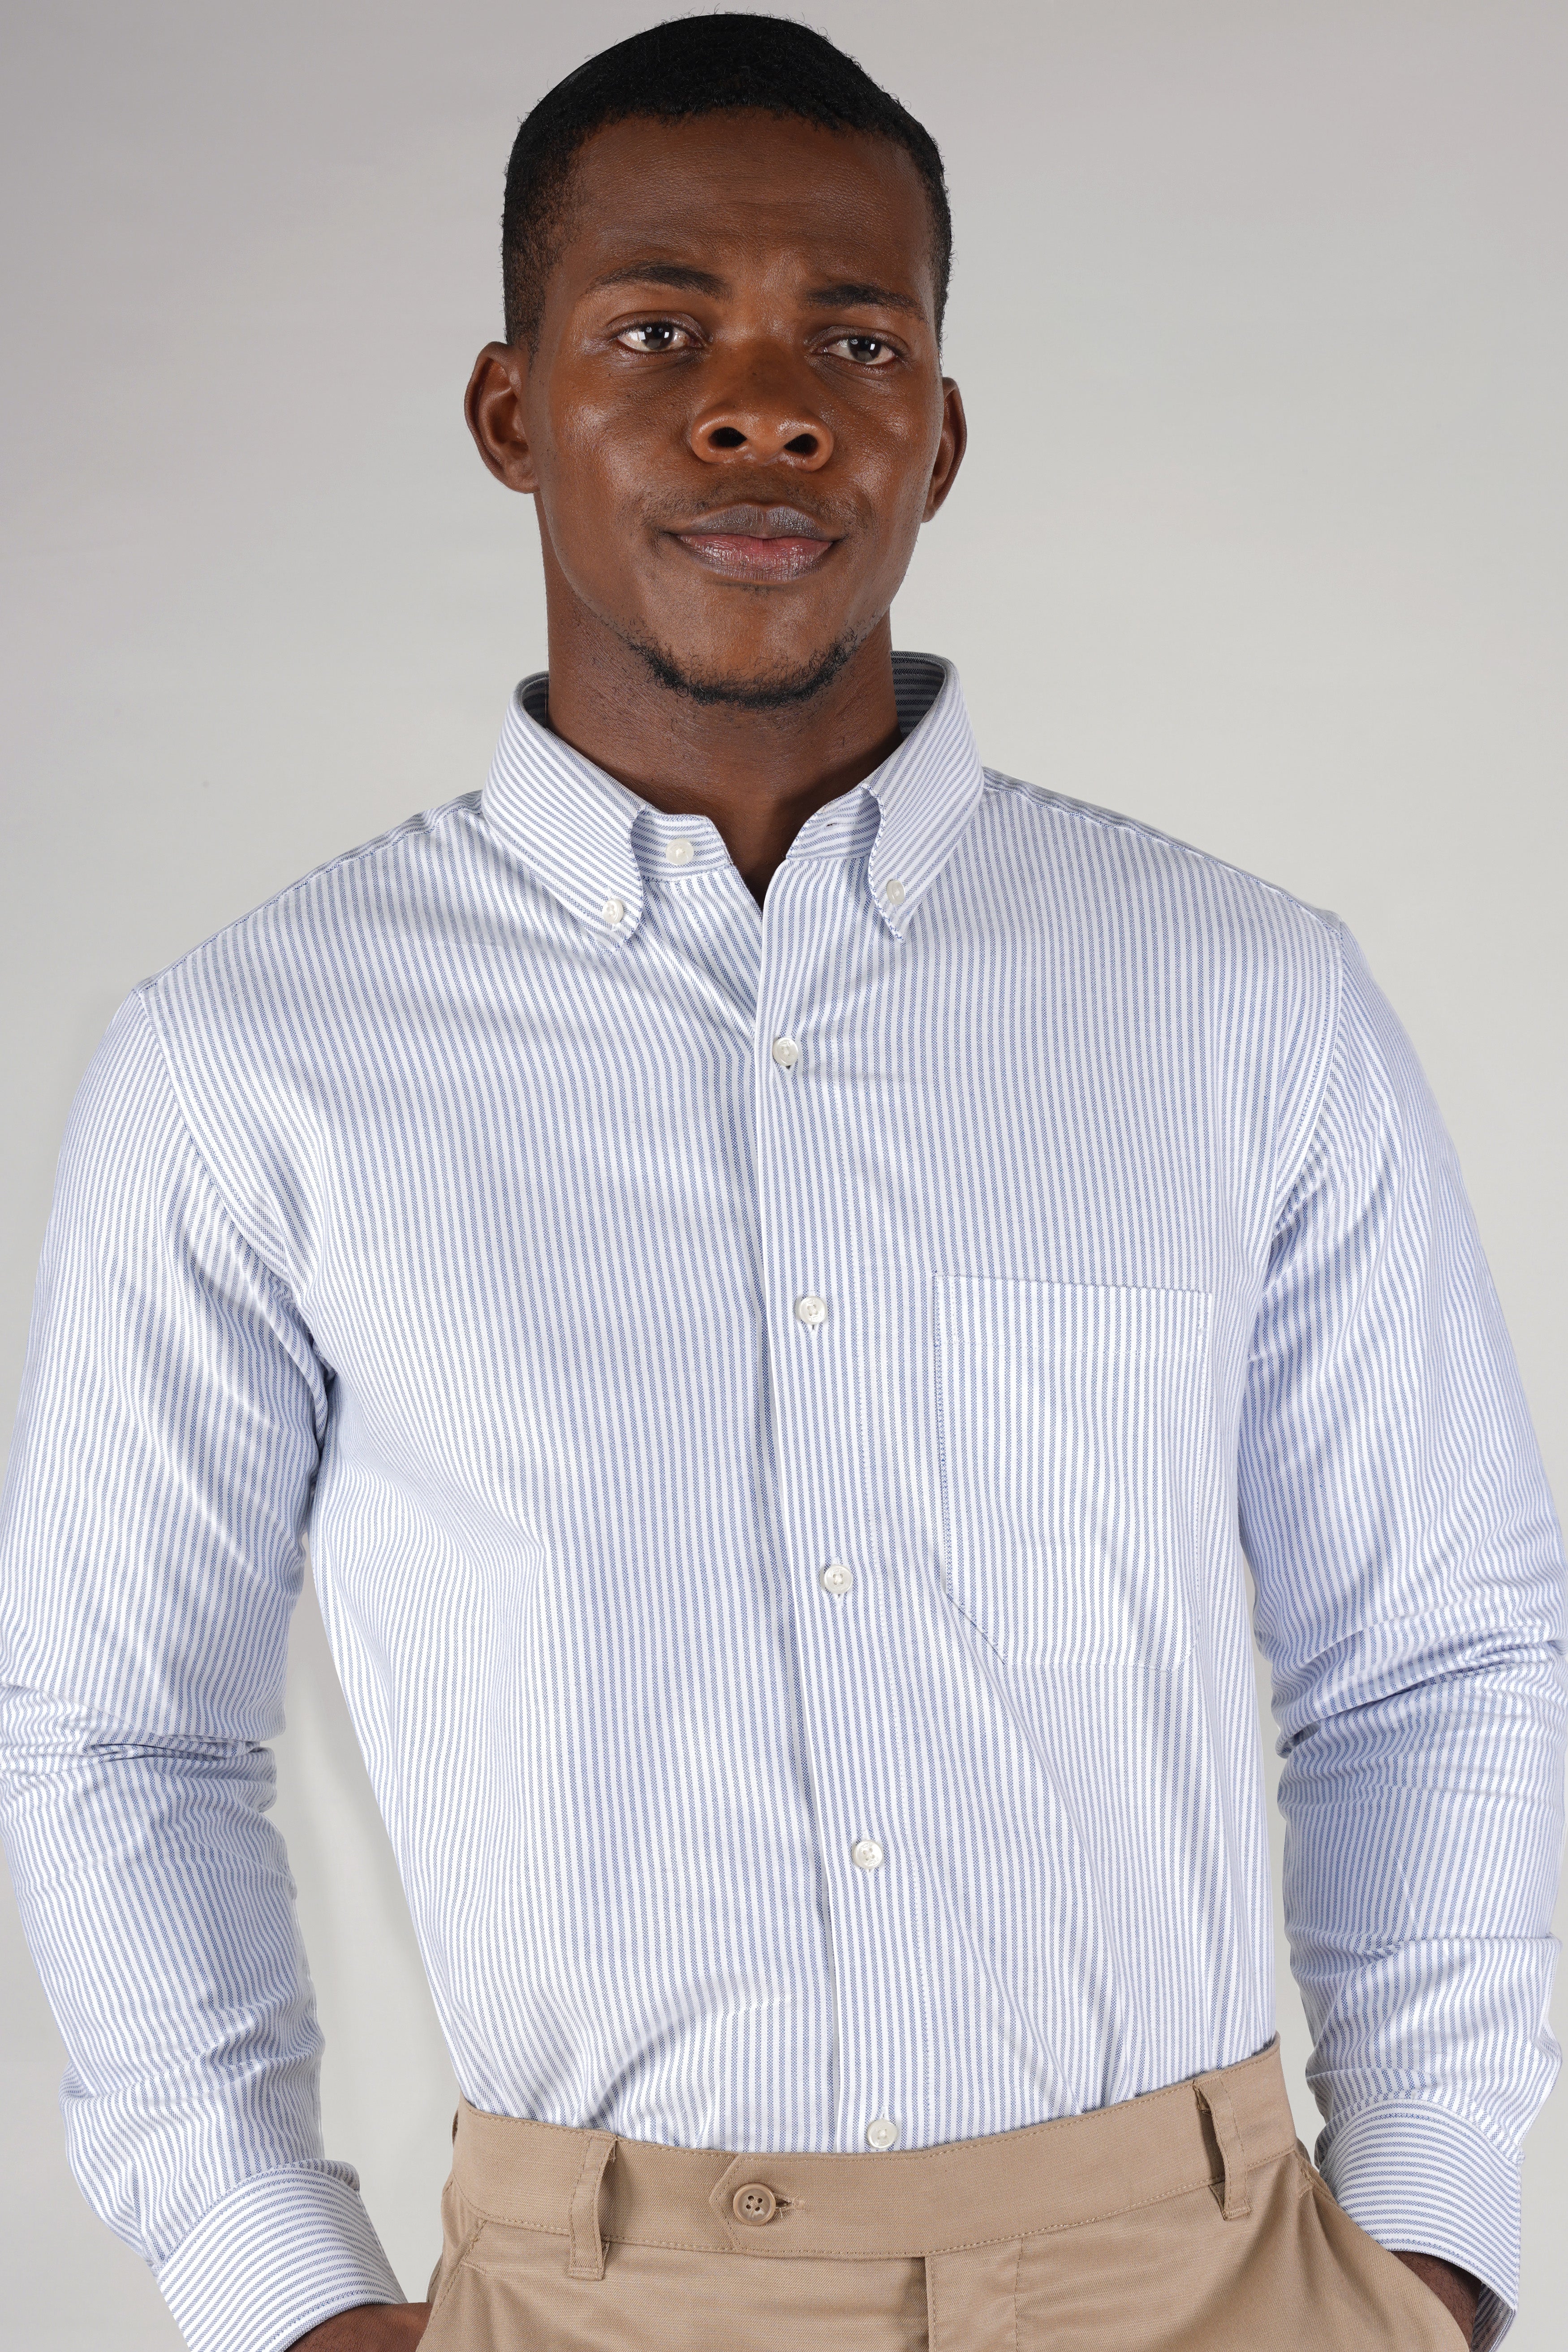 Bright White with Periwinkle Blue Striped Royal Oxford Shirt